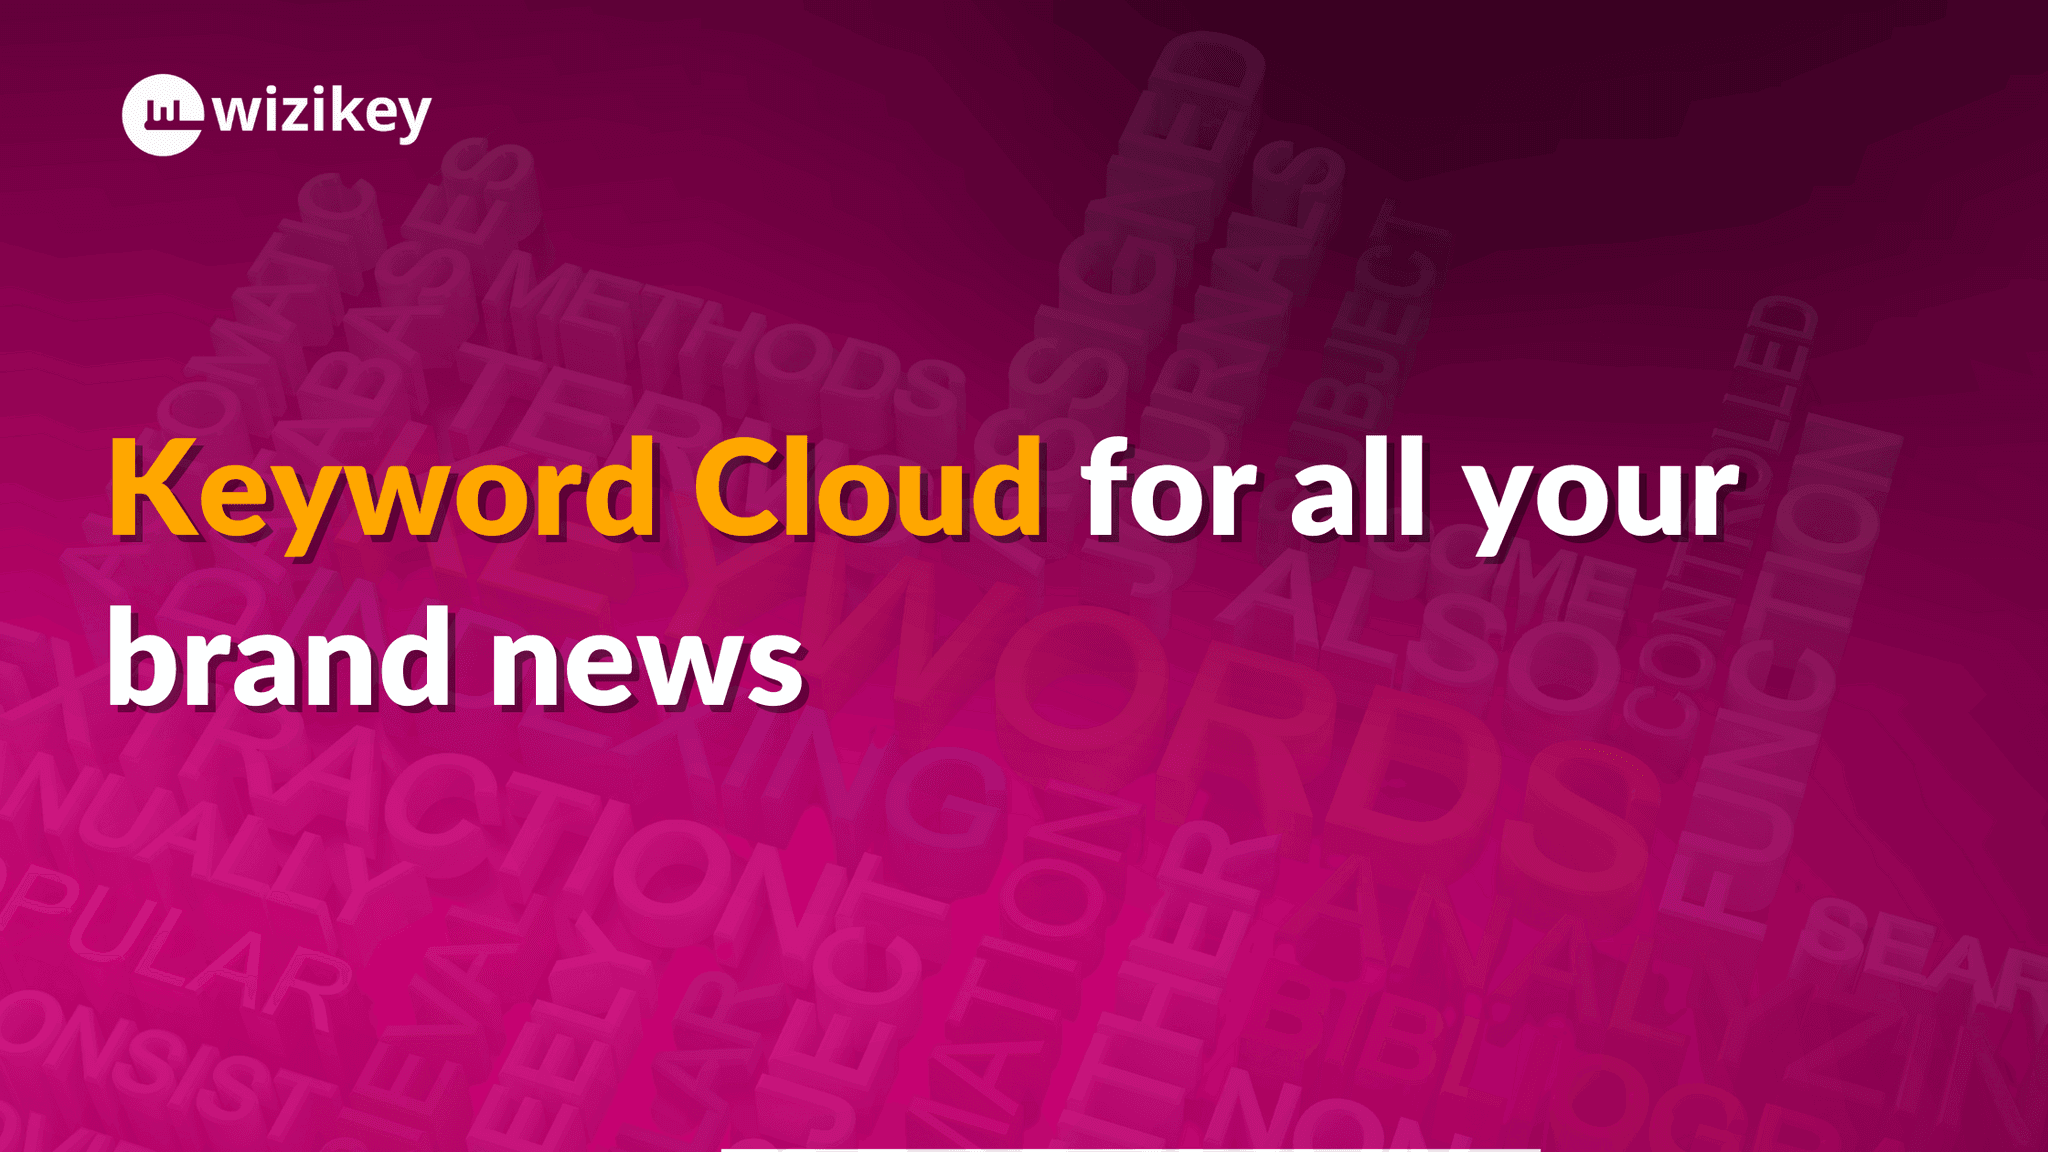 You have a keyword cloud for all your Brand Keywords